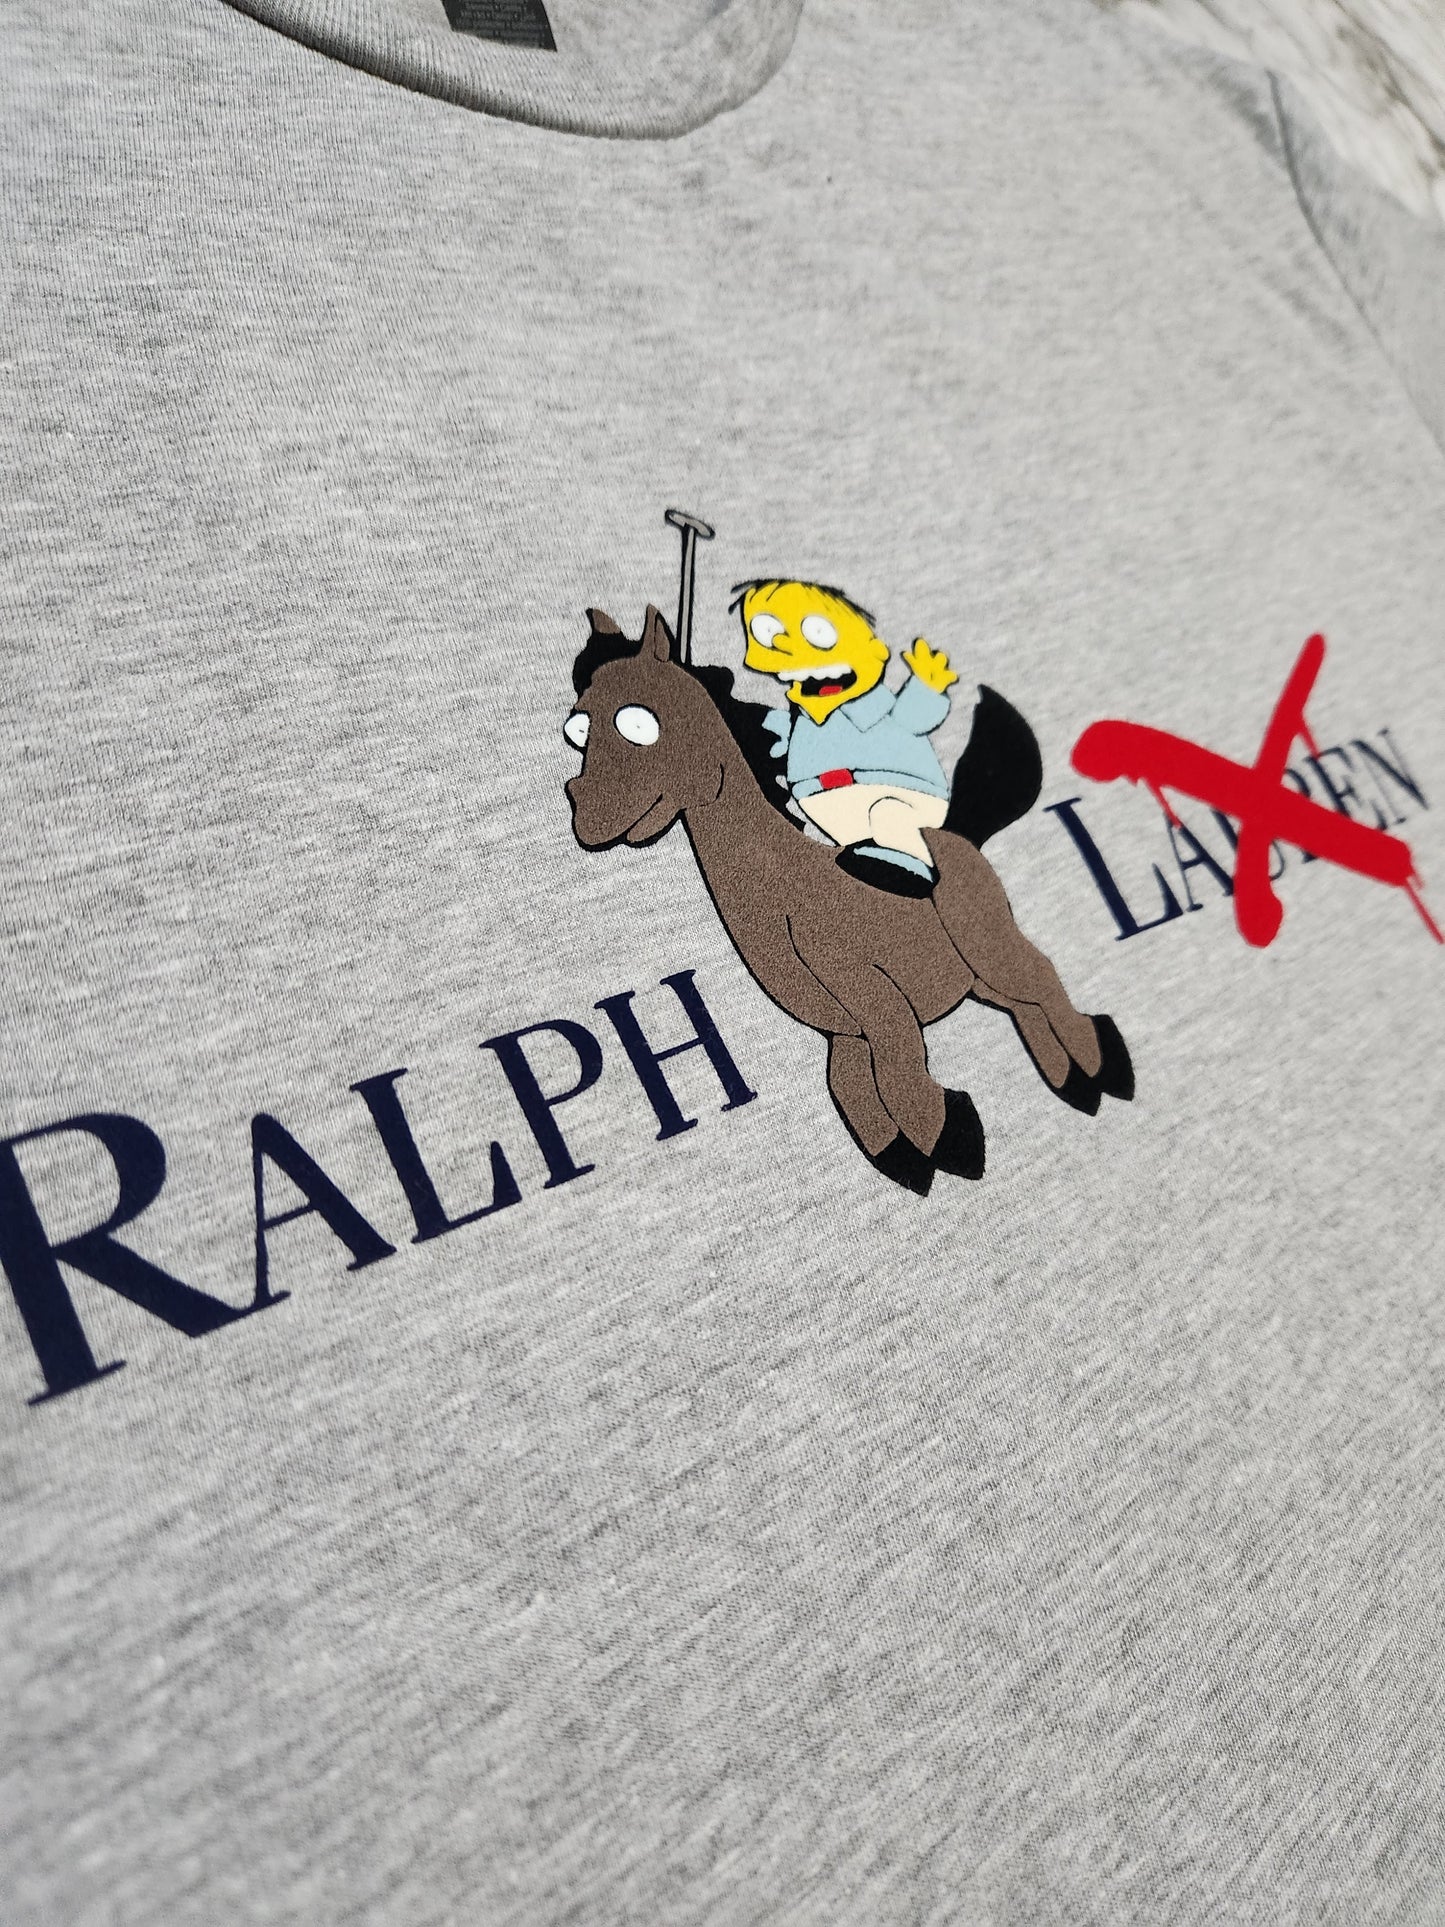 It Ain't Ralph Tho T-Shirt - Centre Ave Clothing Co.